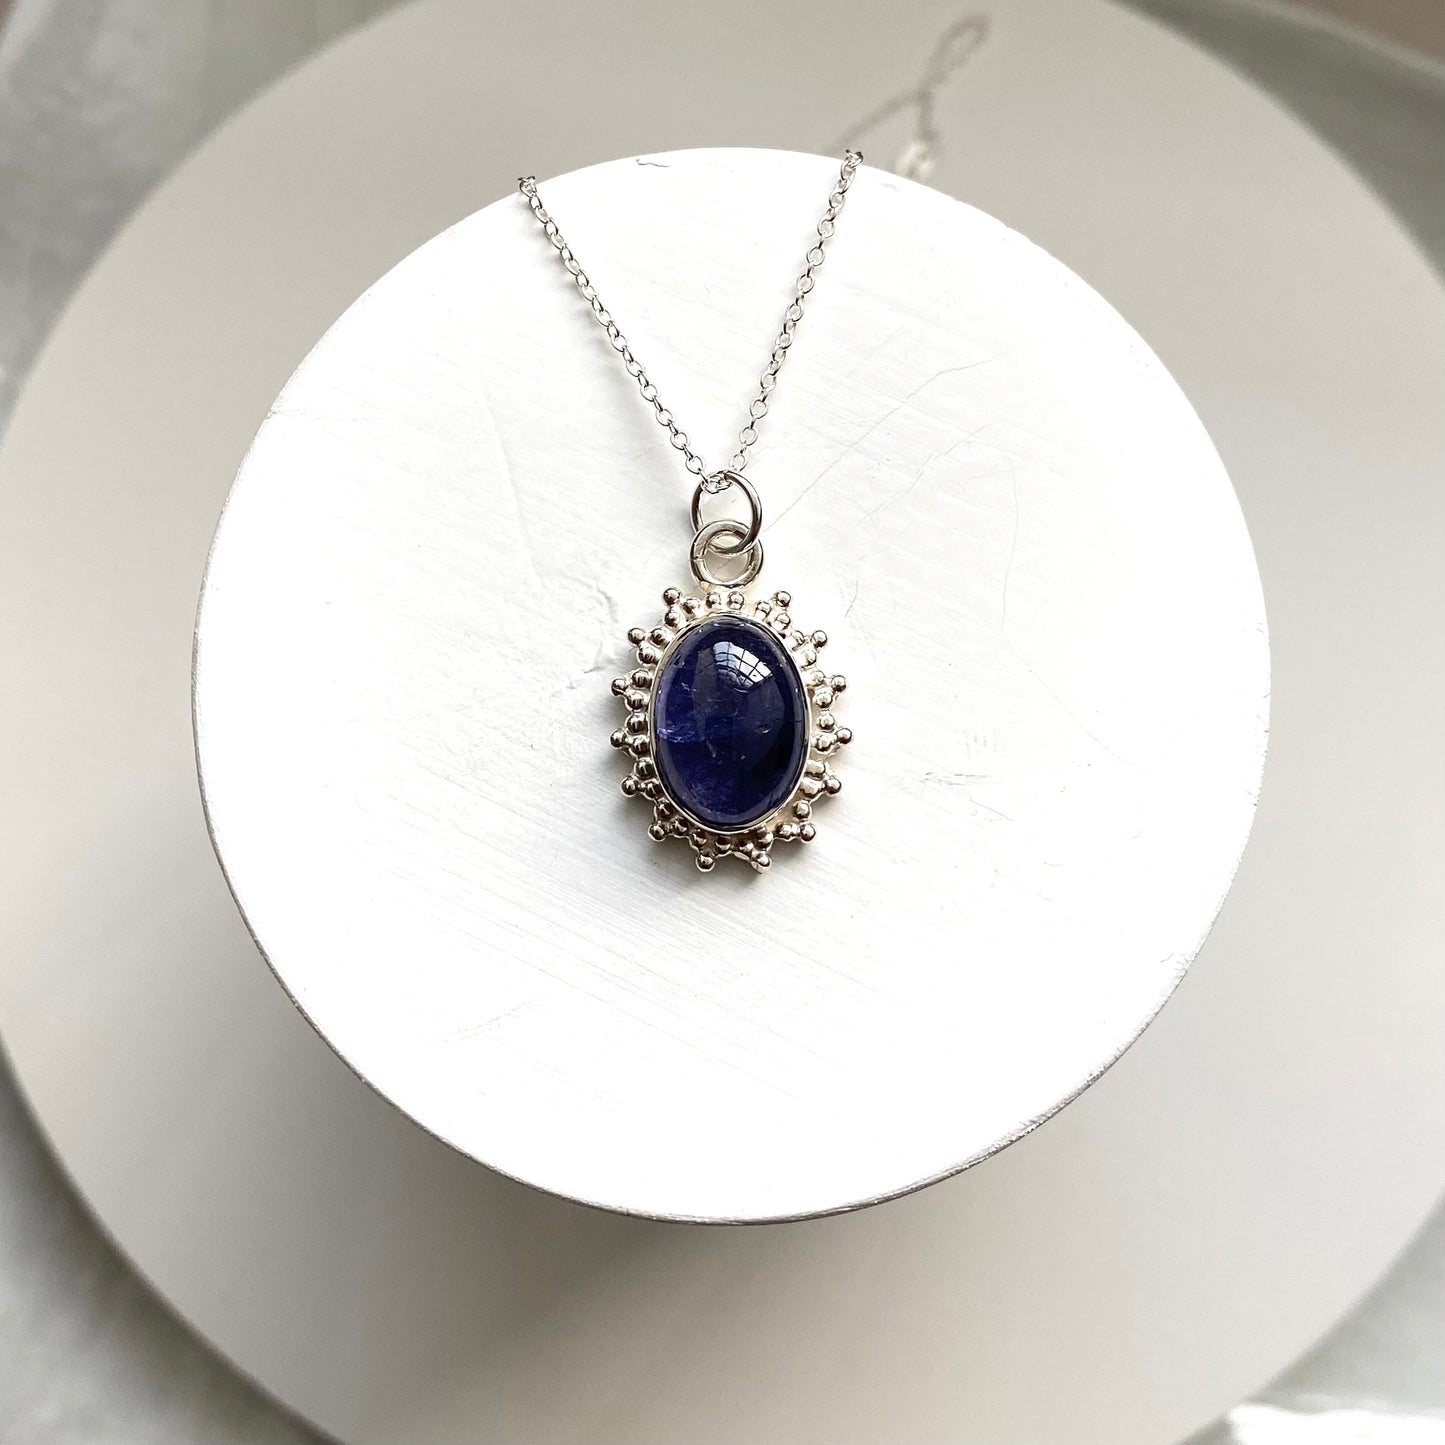 Tanzanite and sterling silver vintage style pendant